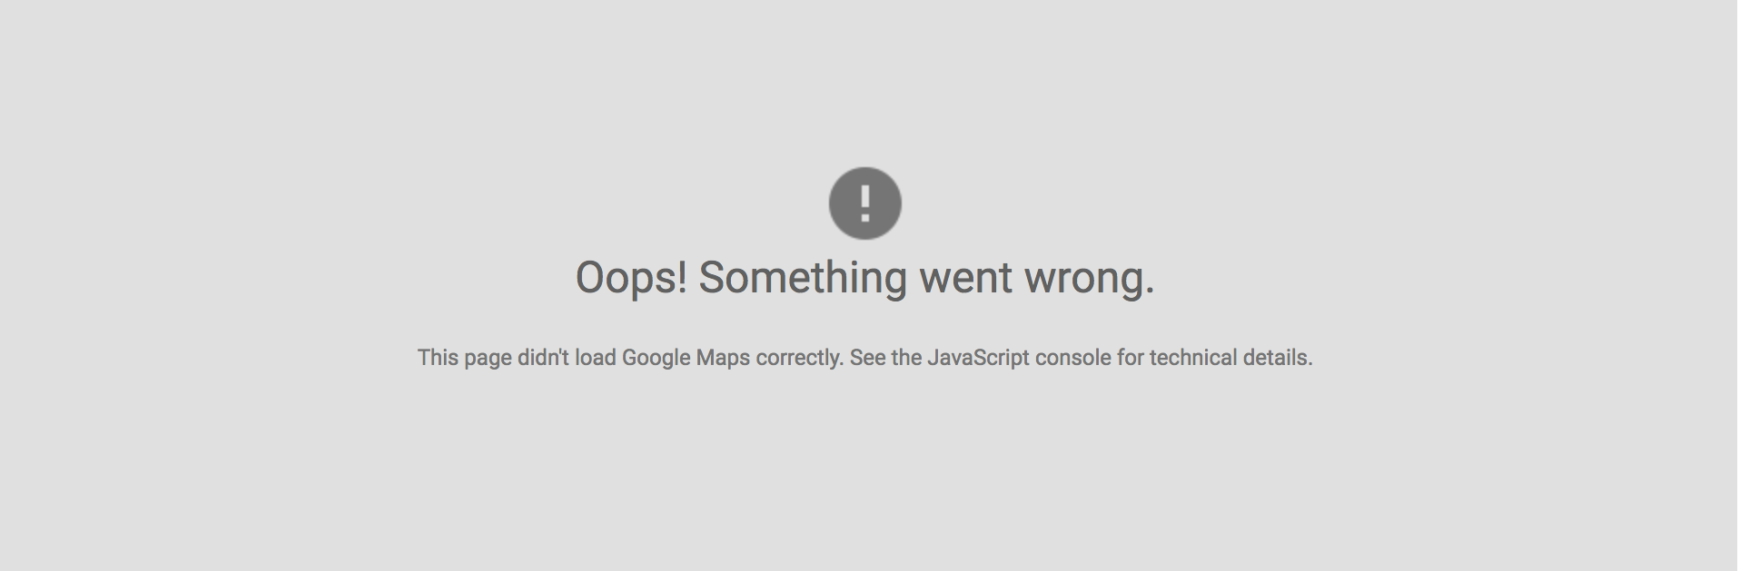 Oops. Something went wrong. Error message from Google Maps screenshot.